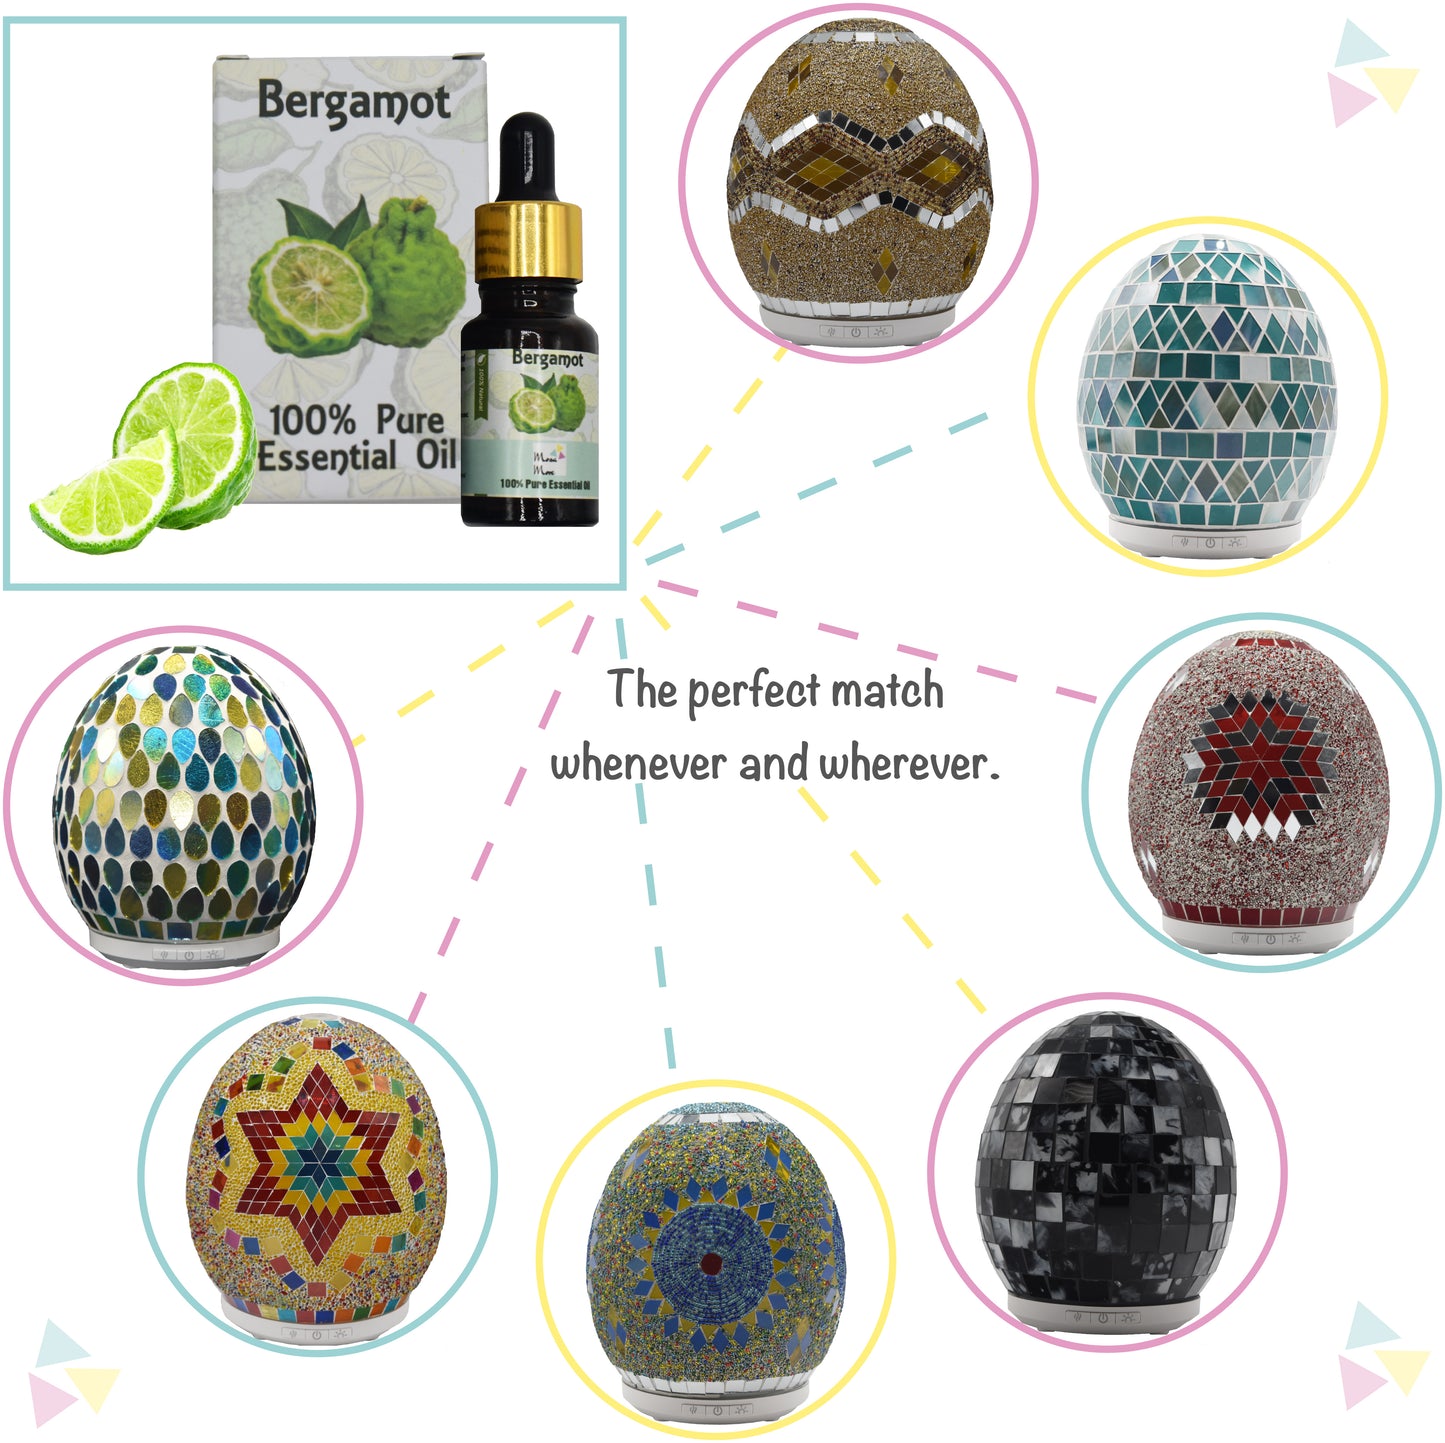 Mosa More Bergamot Pure Essential Oil Boost Energy and Aromatherapy Diffuser -10ml